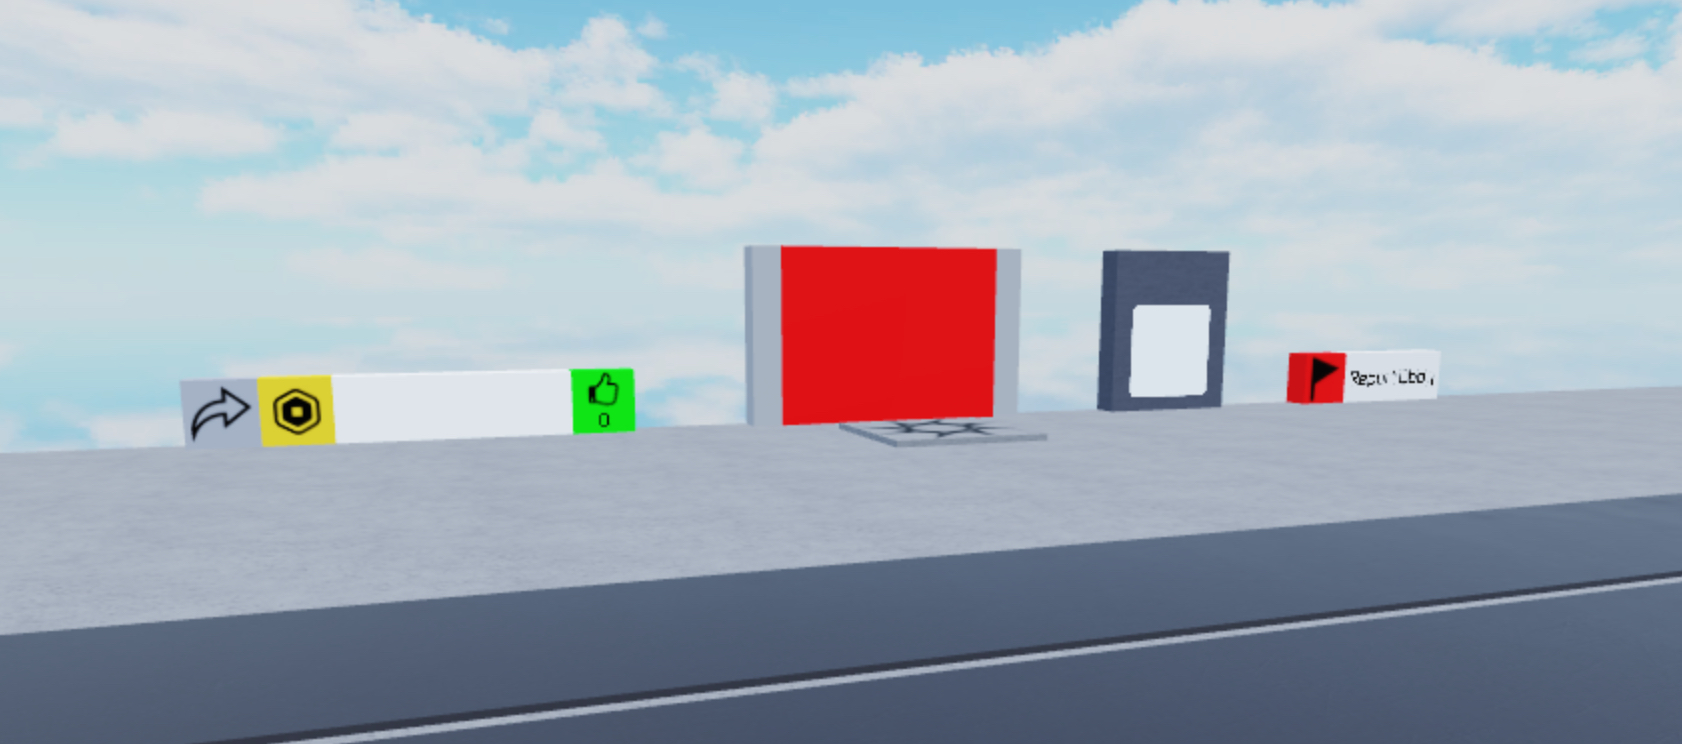 doors but super Easy Mode Changes In Obby Creator by Me 